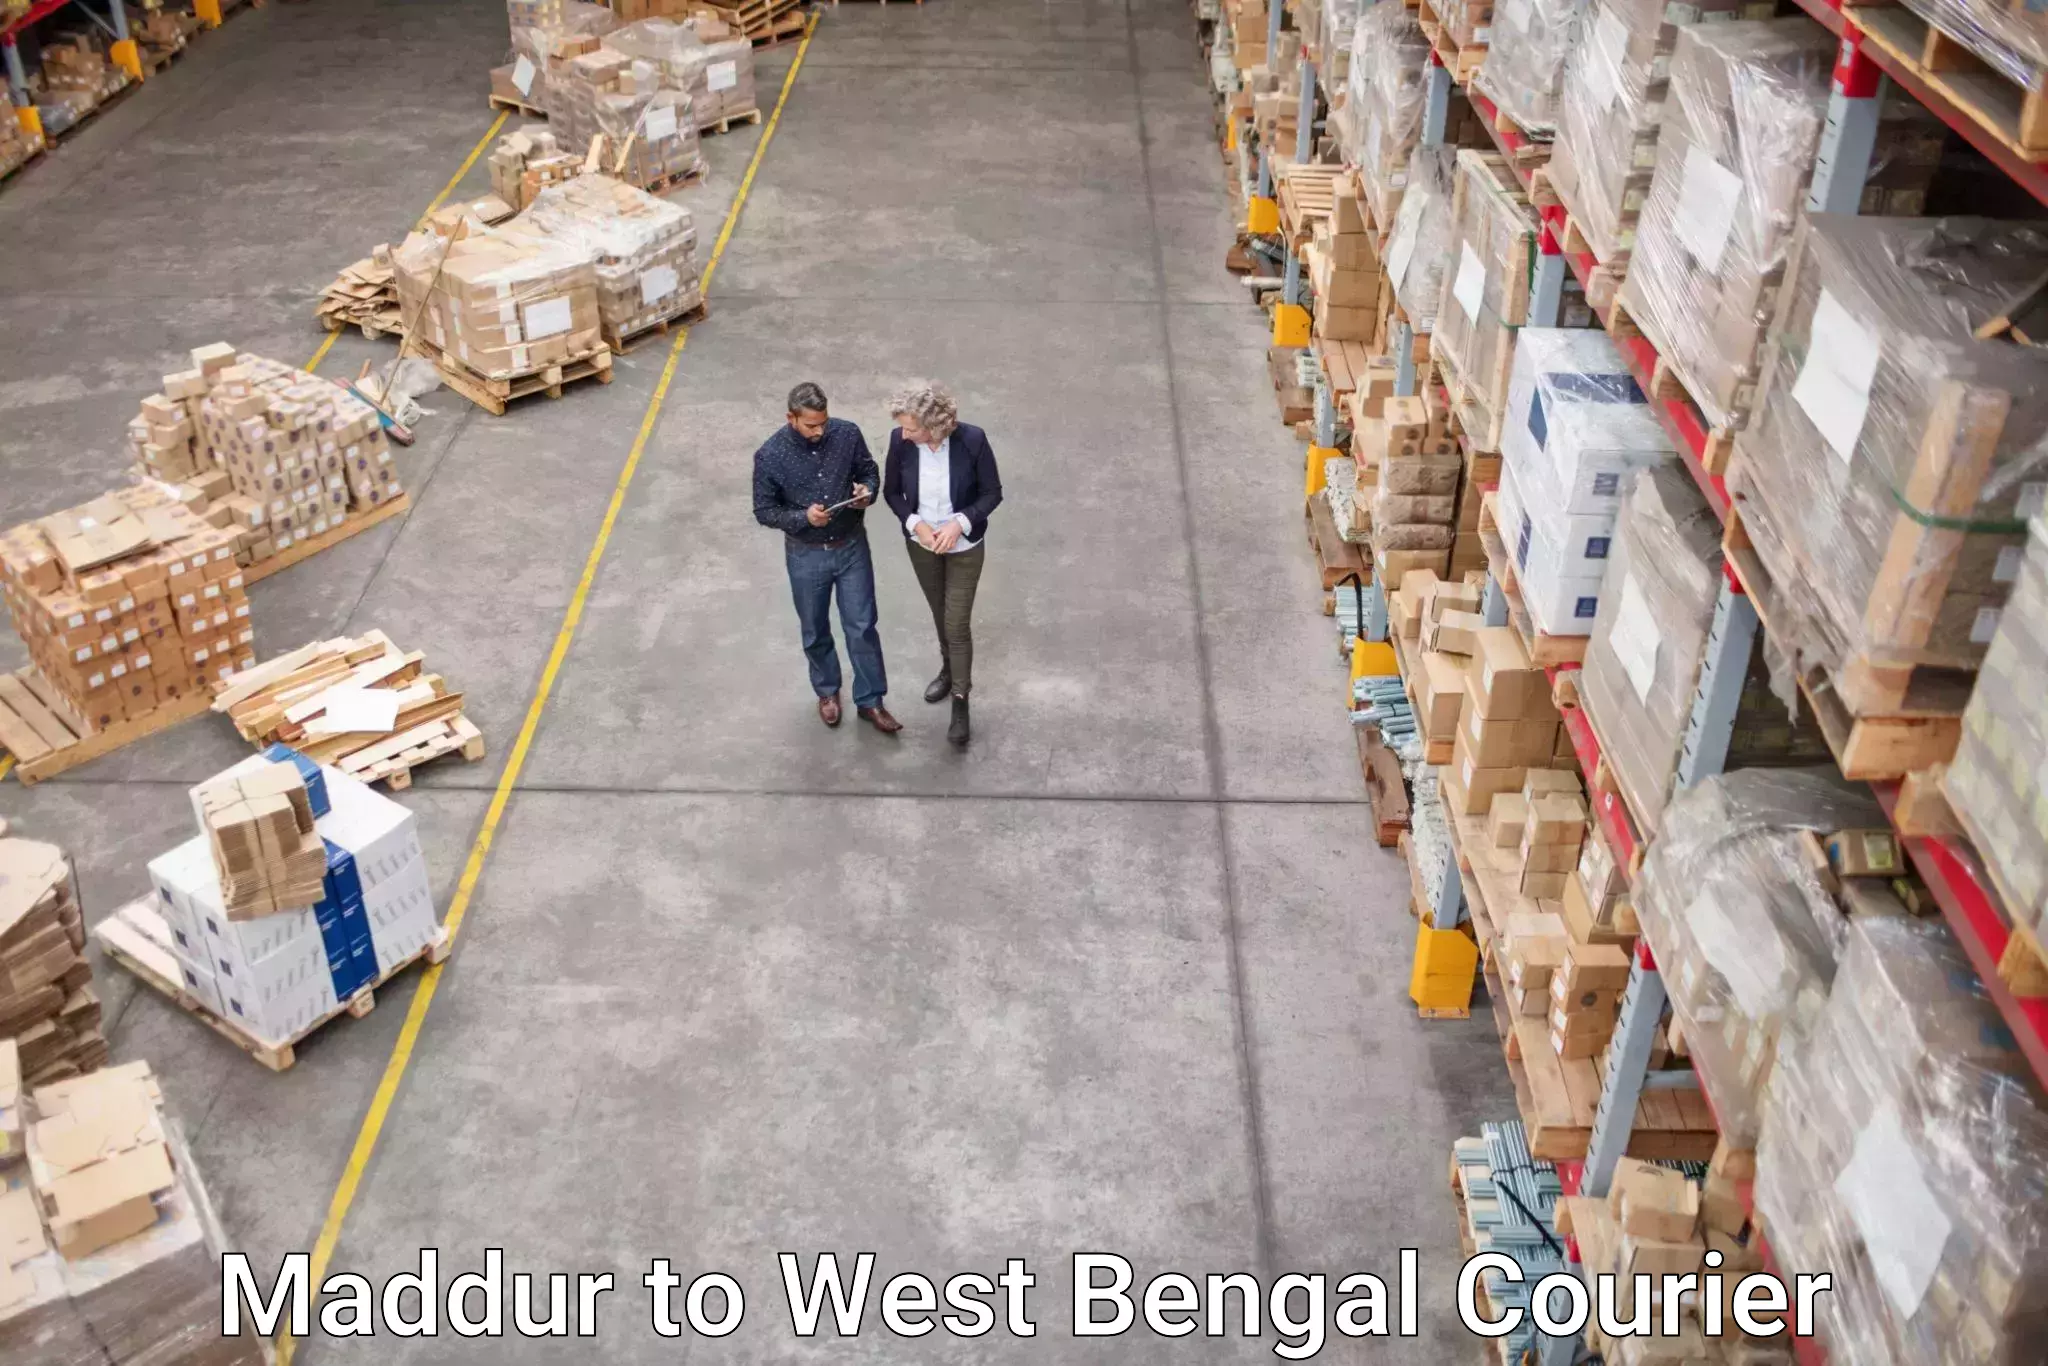 Weekend courier service Maddur to West Bengal